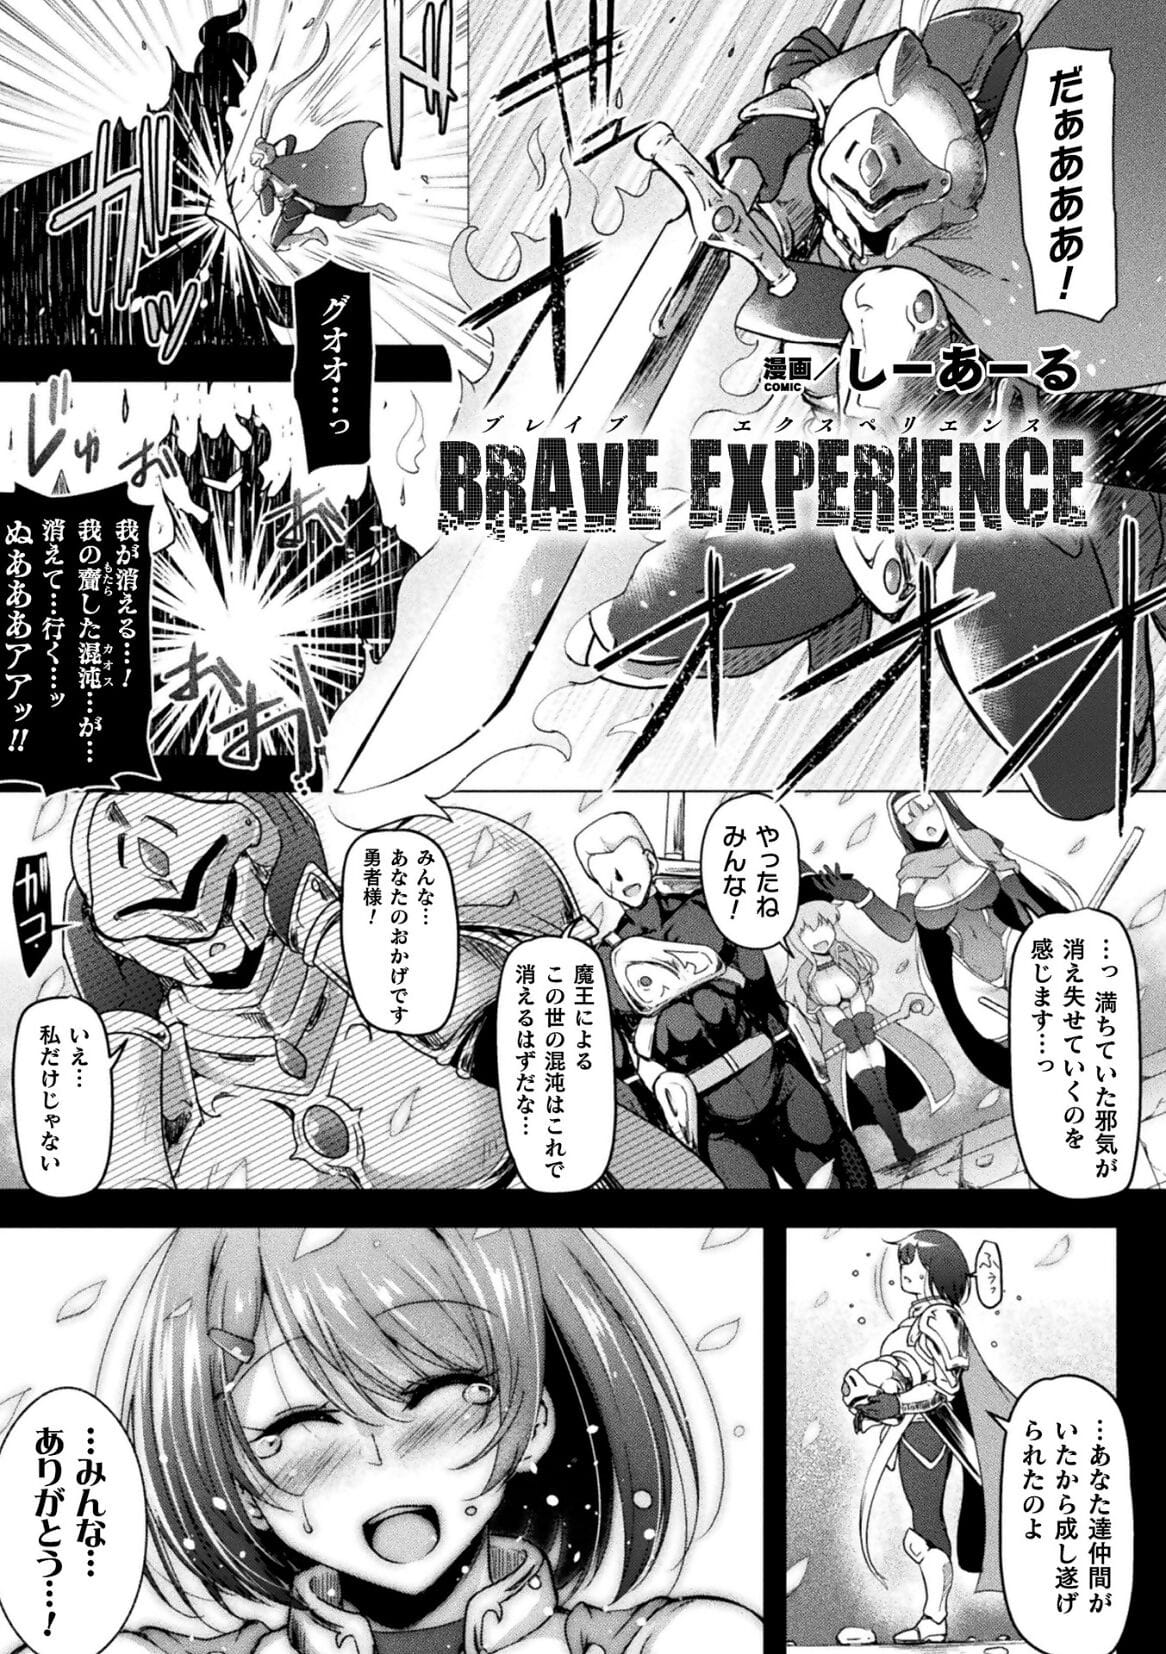 BRAVE EXPERIENCE page 1